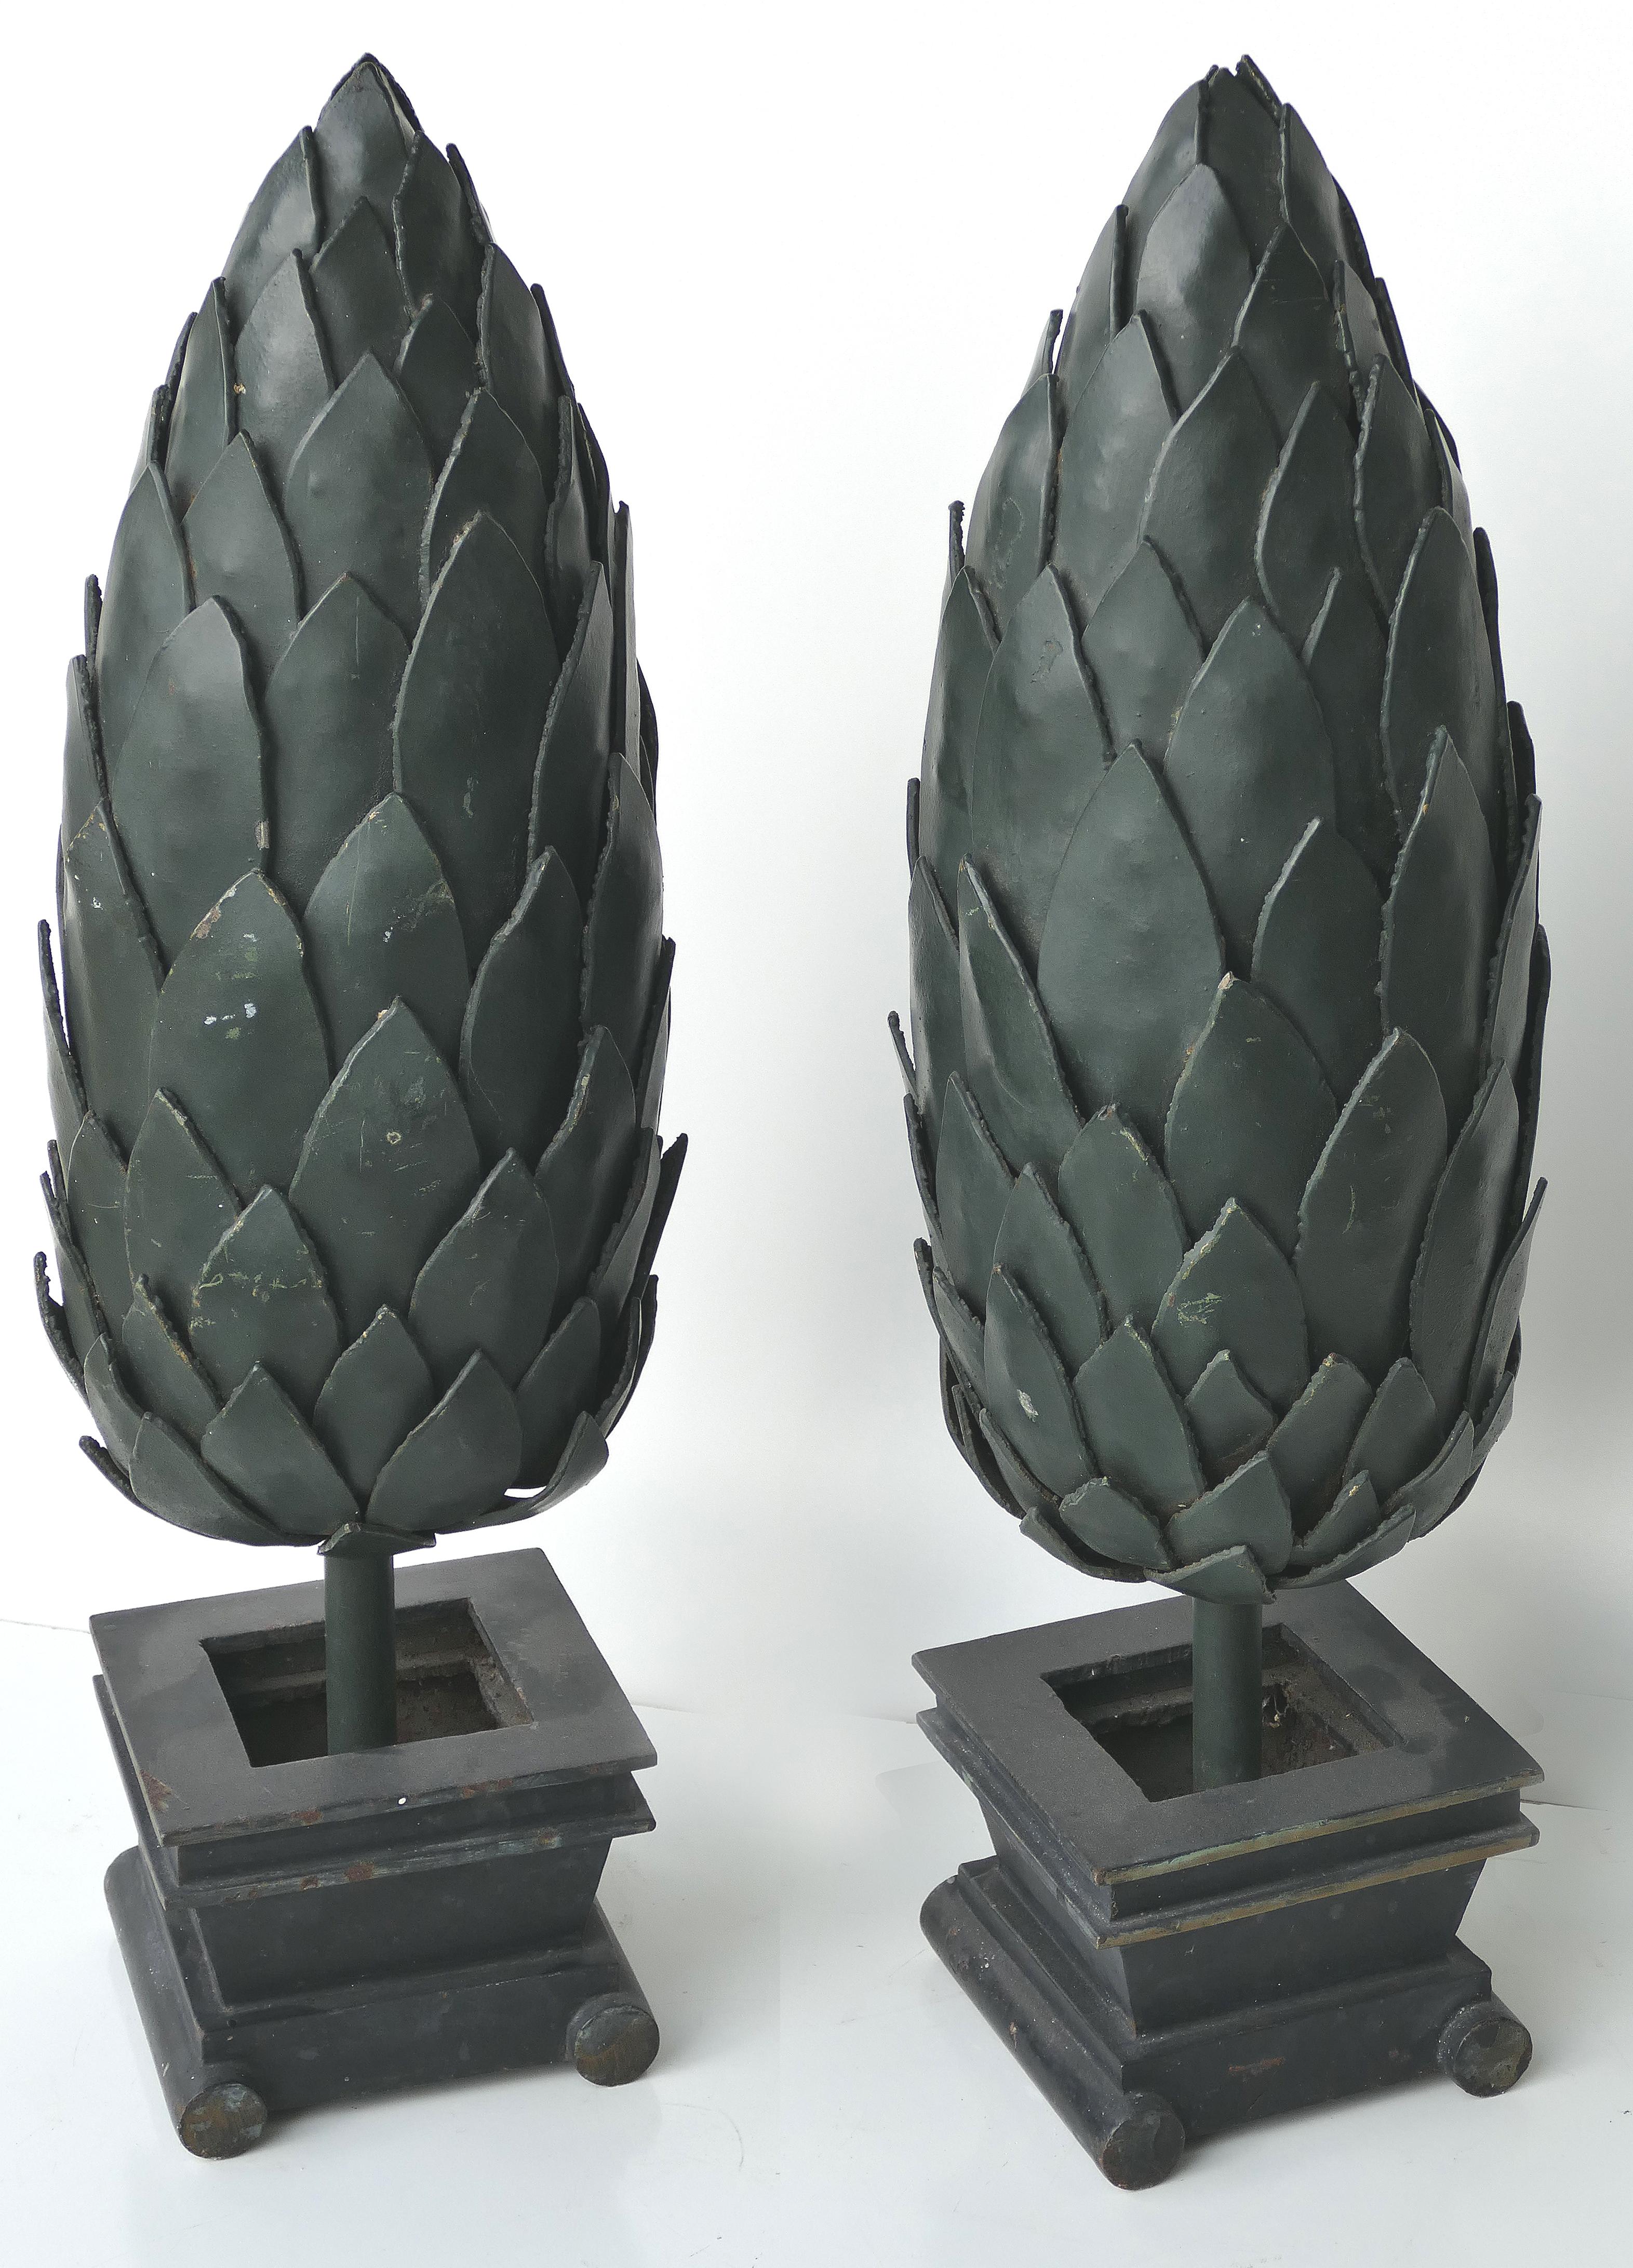 Versace commissioned pair of iron topiary sculptures


Offered for sale is a fabulous pair of vintage iron topiary sculptures that were originally commissioned for the Versace store in Miami Beach. These sculptures have matching planter bases and